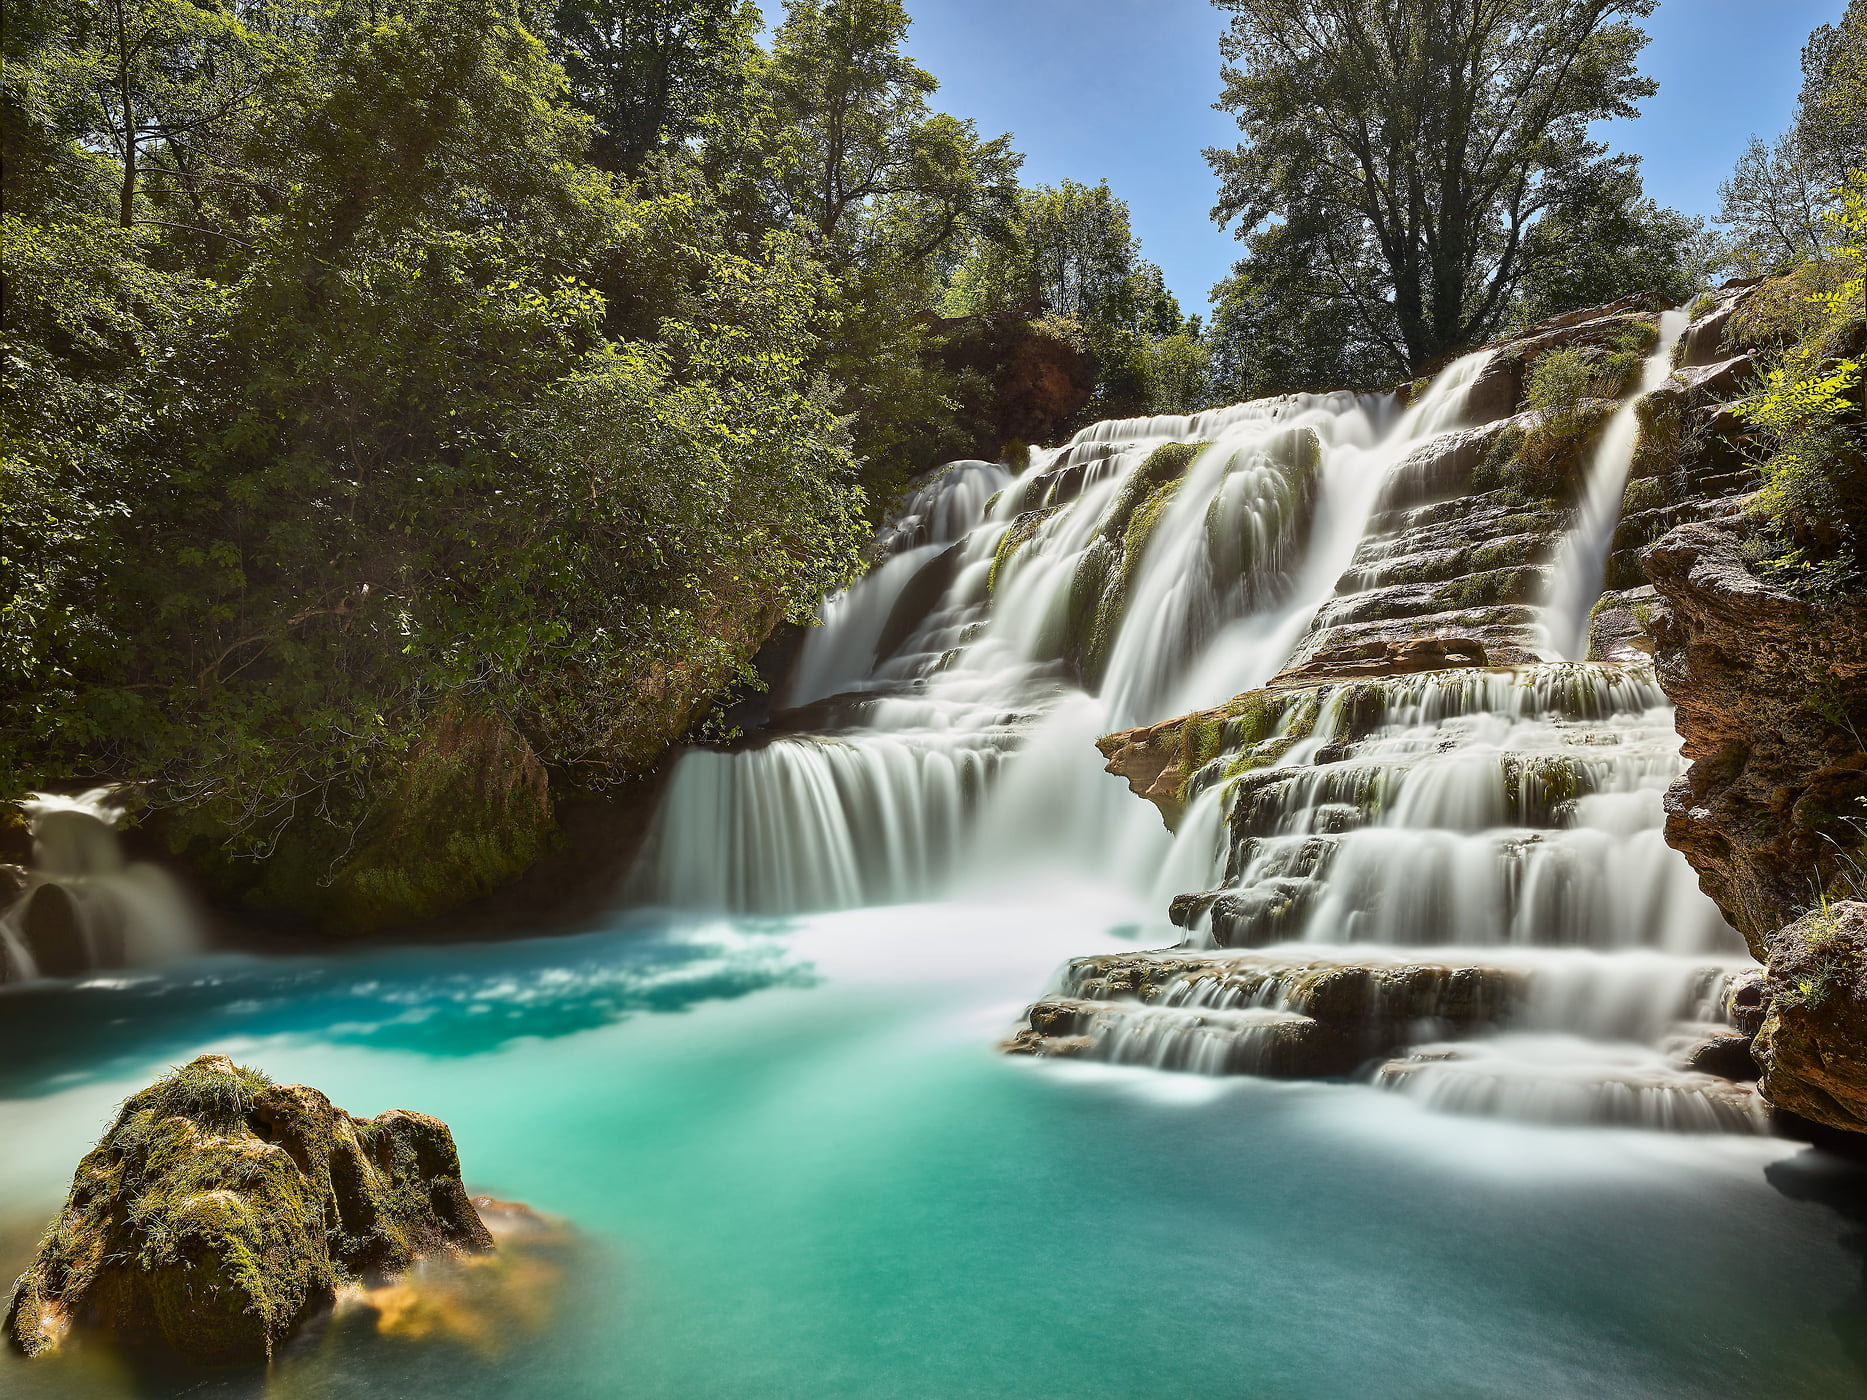 180 megapixels! A very high resolution, big photo print of a waterfall with trees and rocks; nature photograph created by David Meaux in Cascade de Navacelles, Navacelles, l'Hérault, France